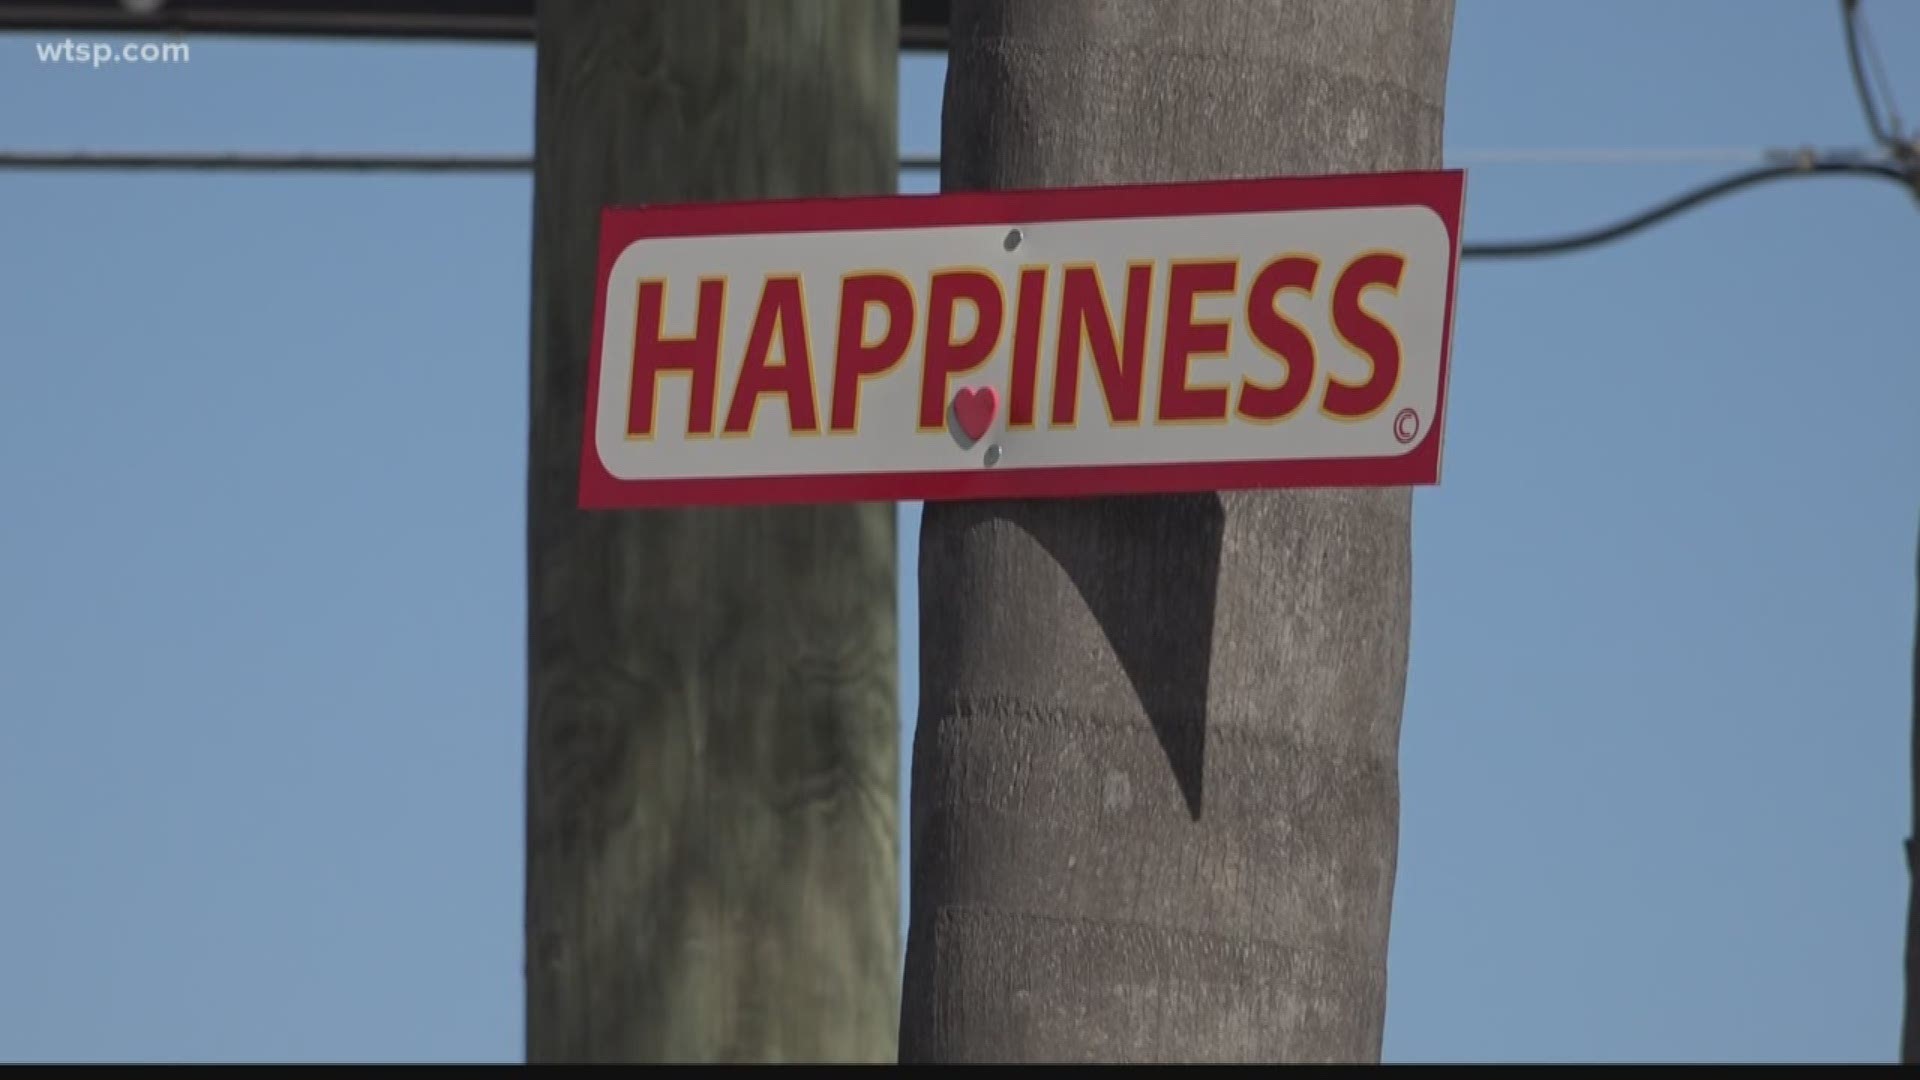 Gary King has hung 48 HAPPINESS signs near his home as a form of therapy. He calls it his 'Happiness experiment.'